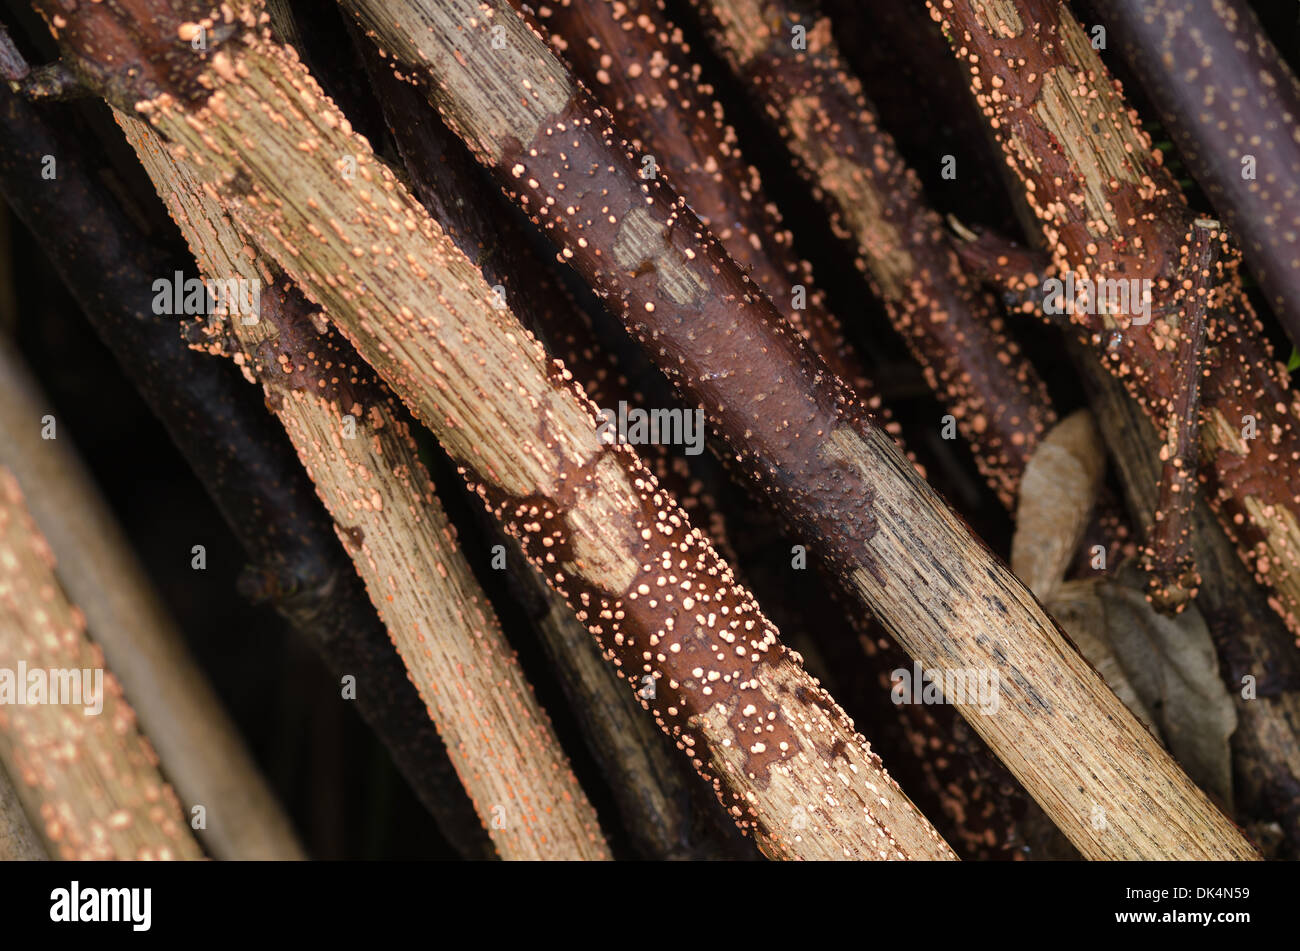 stack of sycamore canes or branches twigs dried out and infected with Winter fungi coral spot Stock Photo